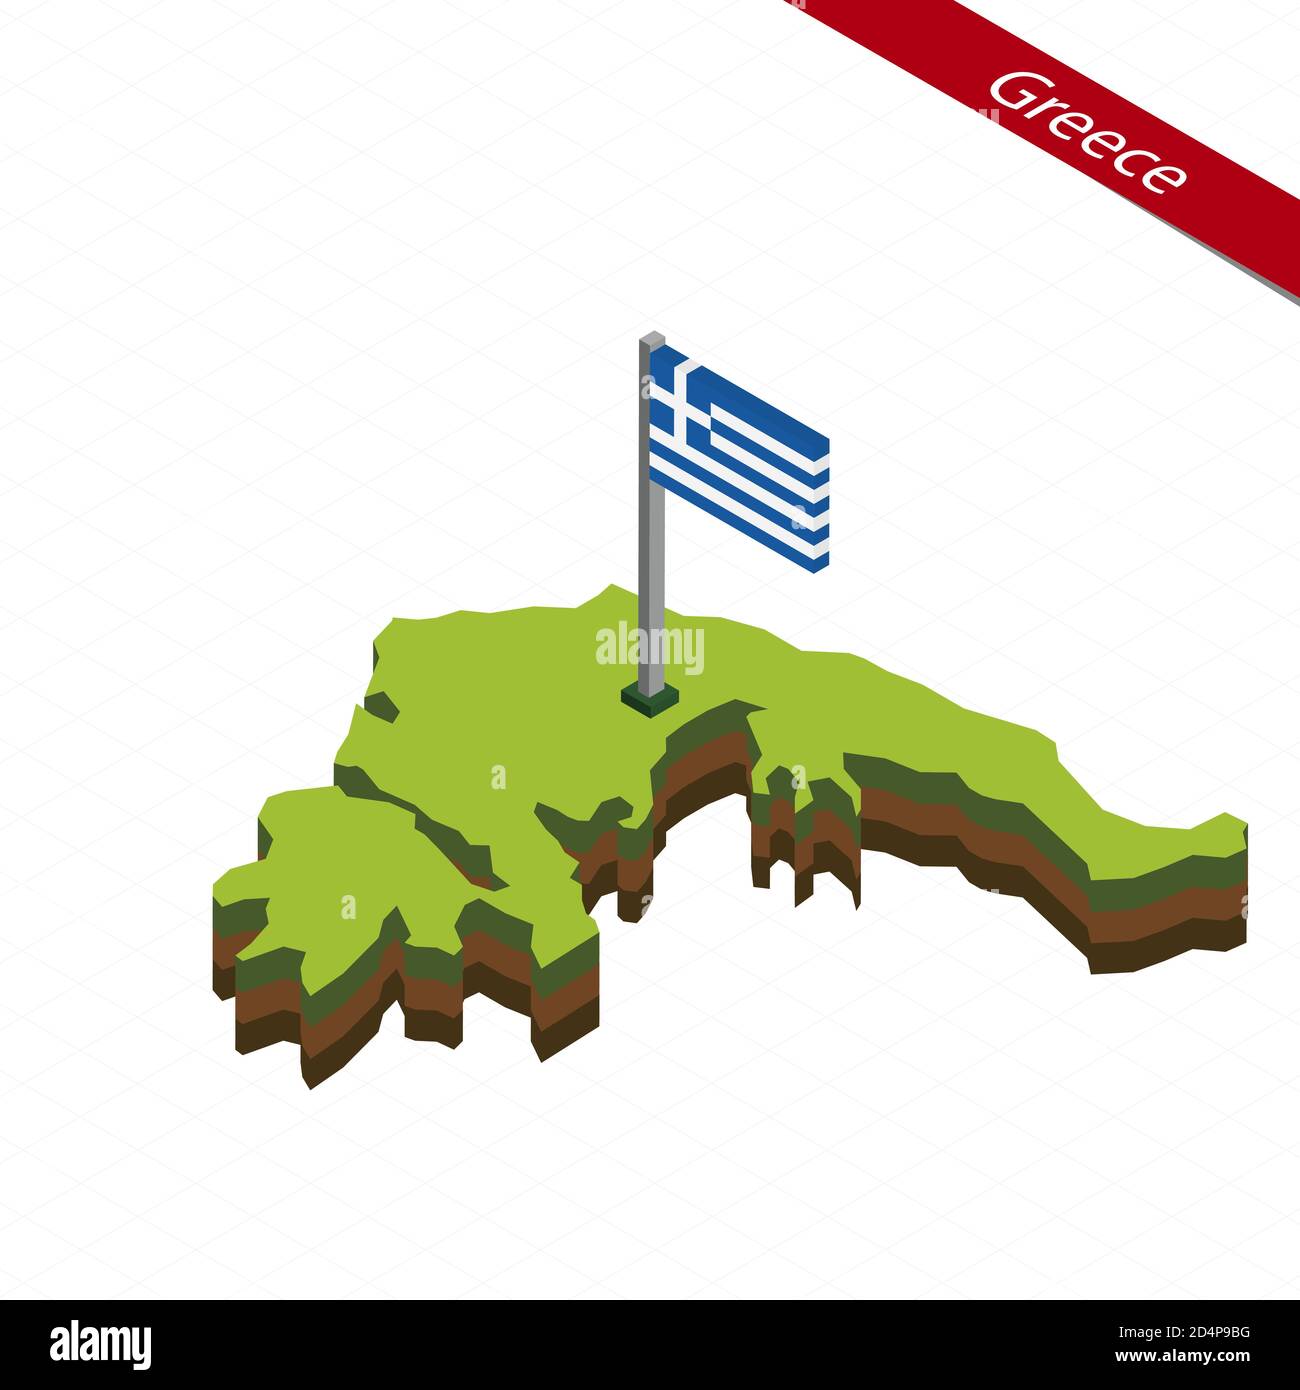 Isometric map and flag of Greece. 3D isometric shape of Greece. Vector Illustration. Stock Vector